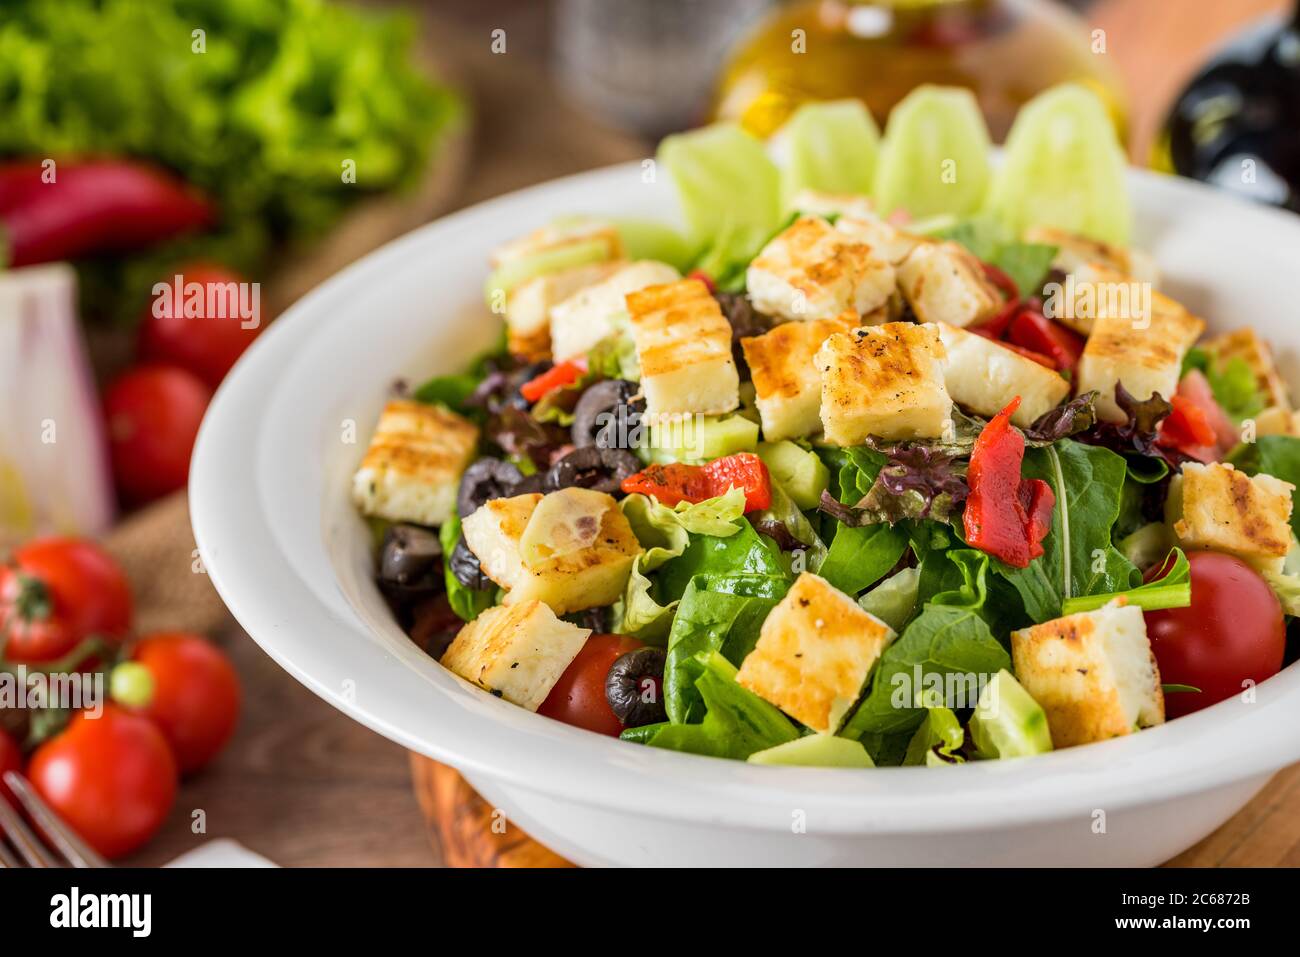 Healthy mixed salad in white bowl on wooden table. Stock Photo